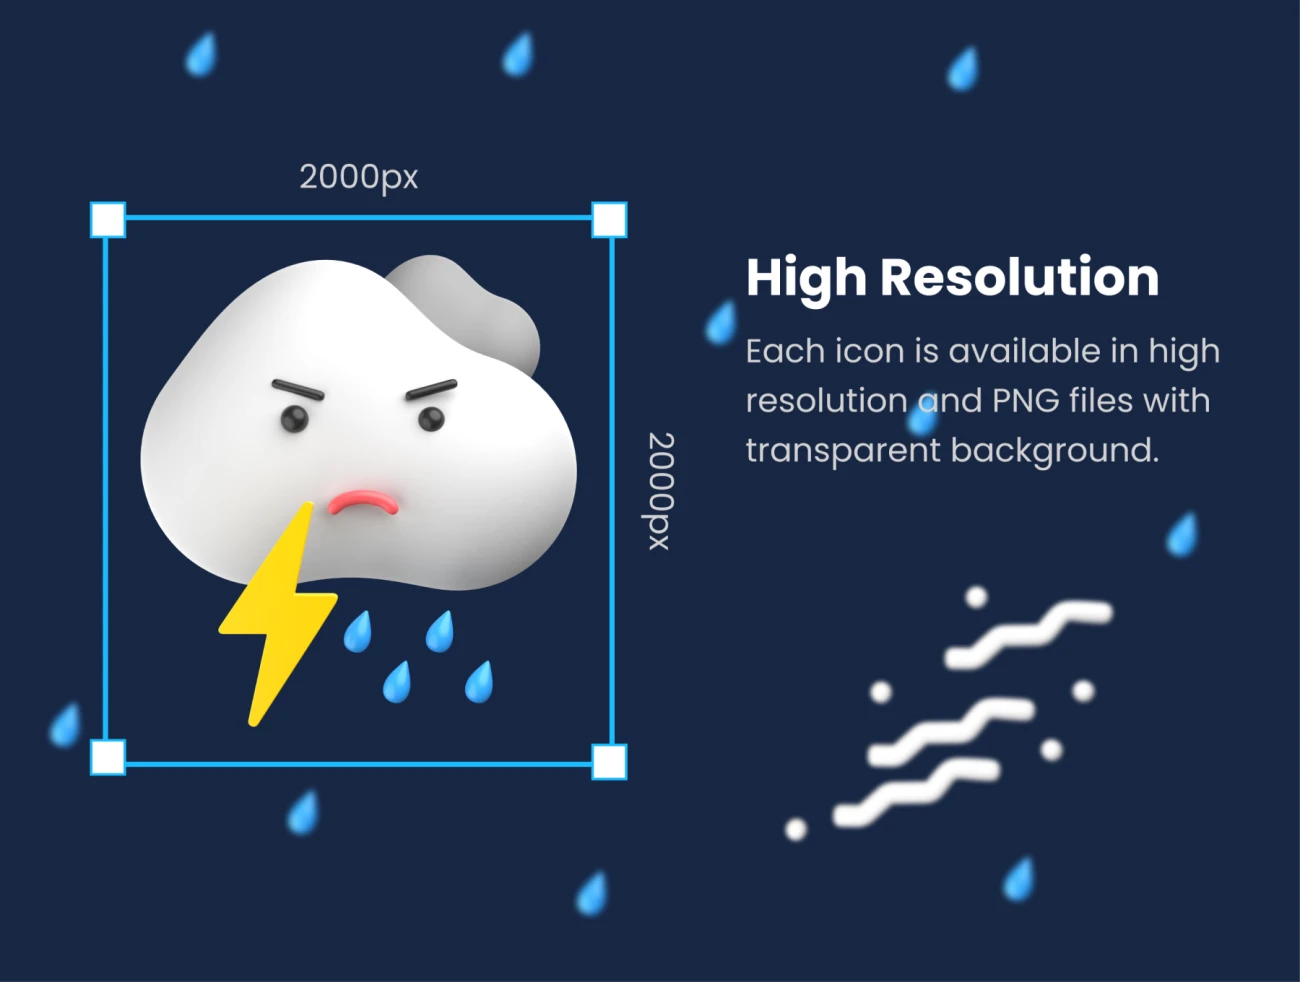 3D拟人情绪化天气图标24款素材下载 3D Weather Icons Emoticons Pack .figma .png .psd插图7